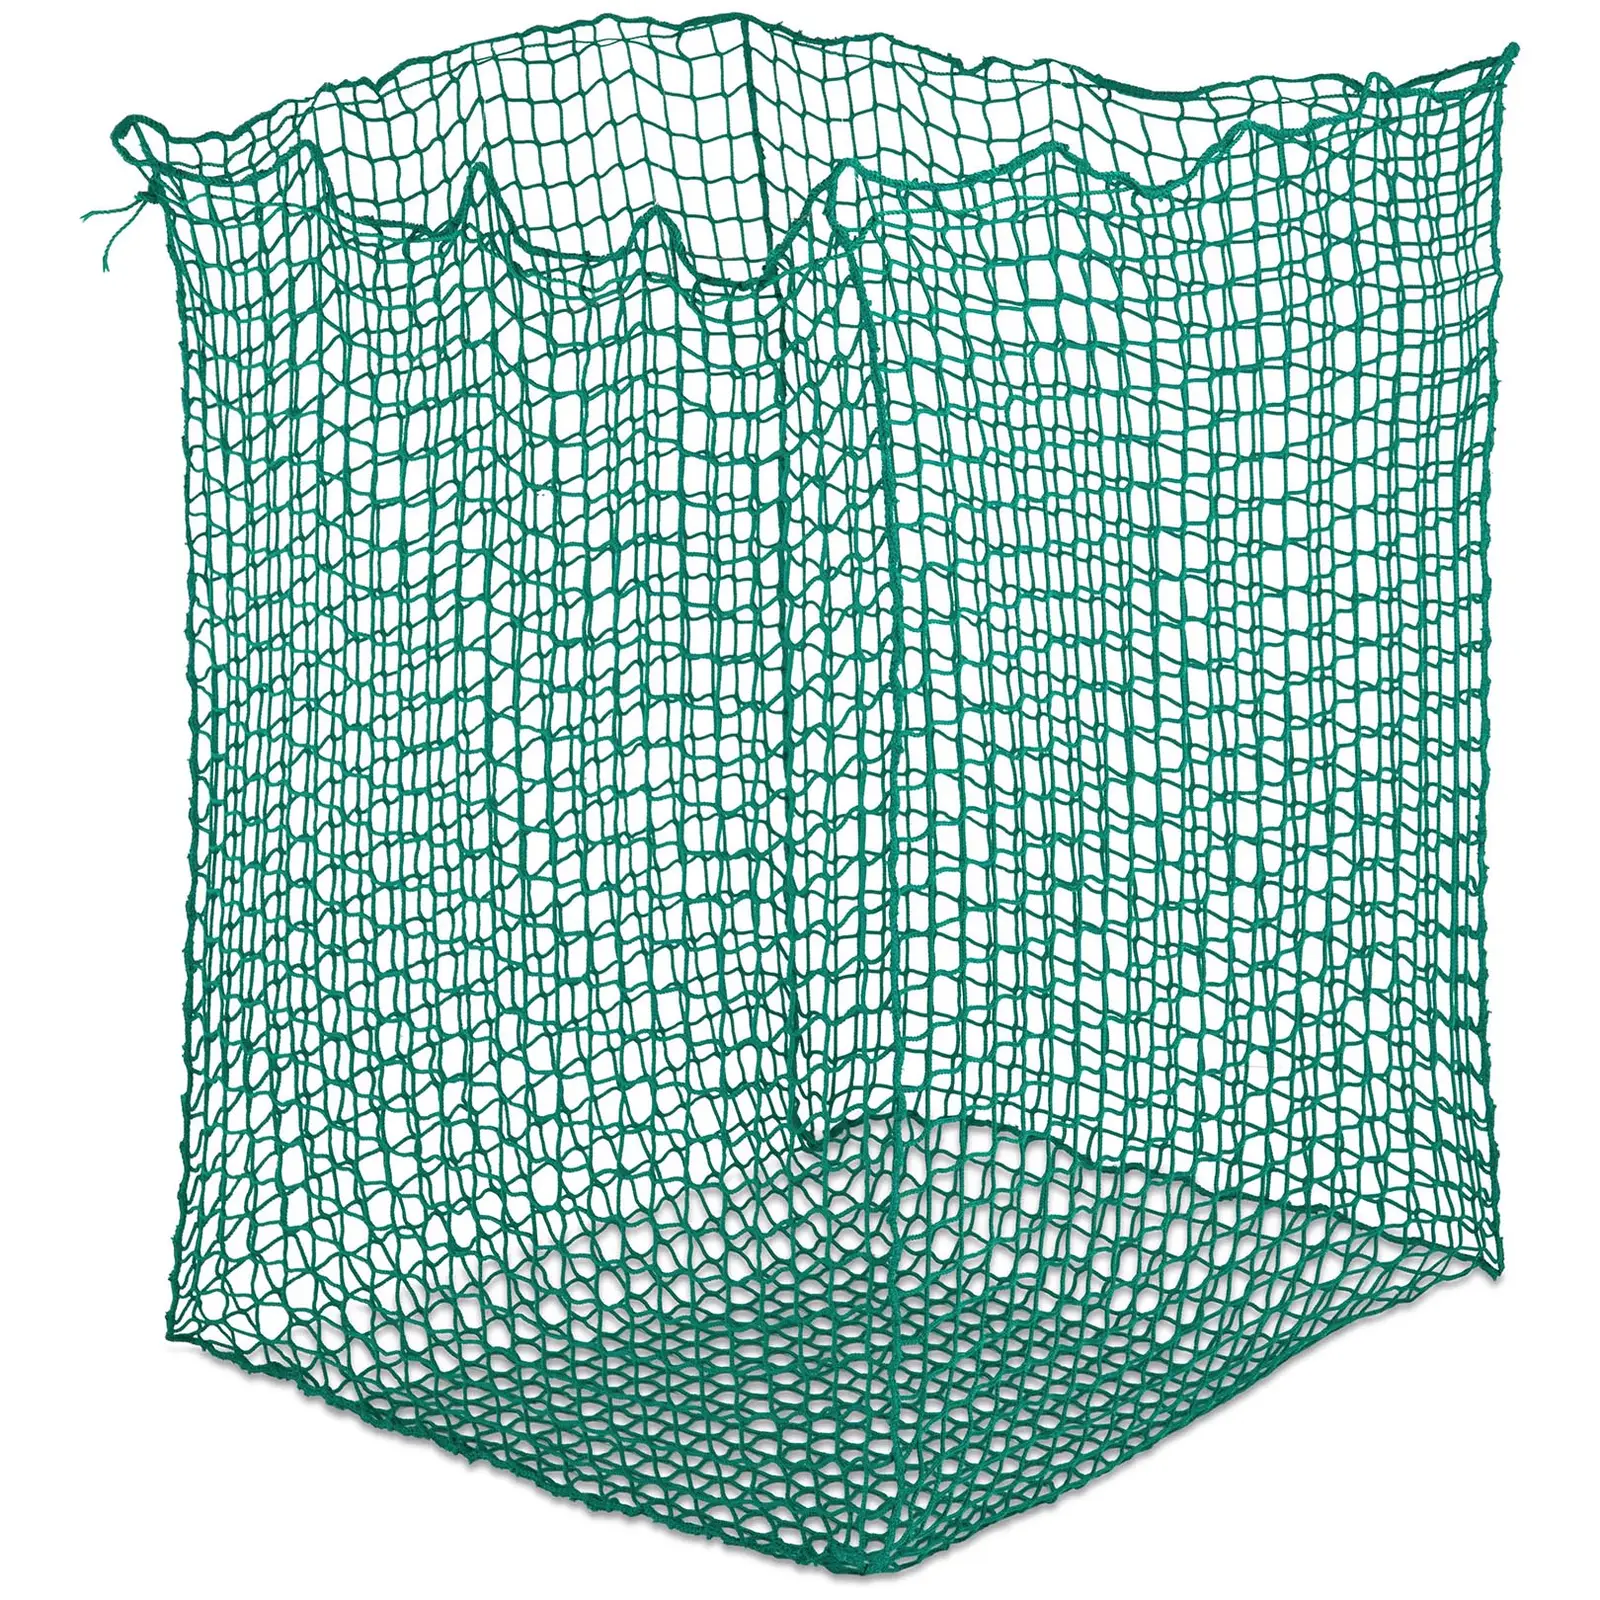 Round Bale Hay Net - 1,400 x 1,400 x 1,600 mm - mesh size: 45 x 45 mm - {{colour_34_old_temp}}